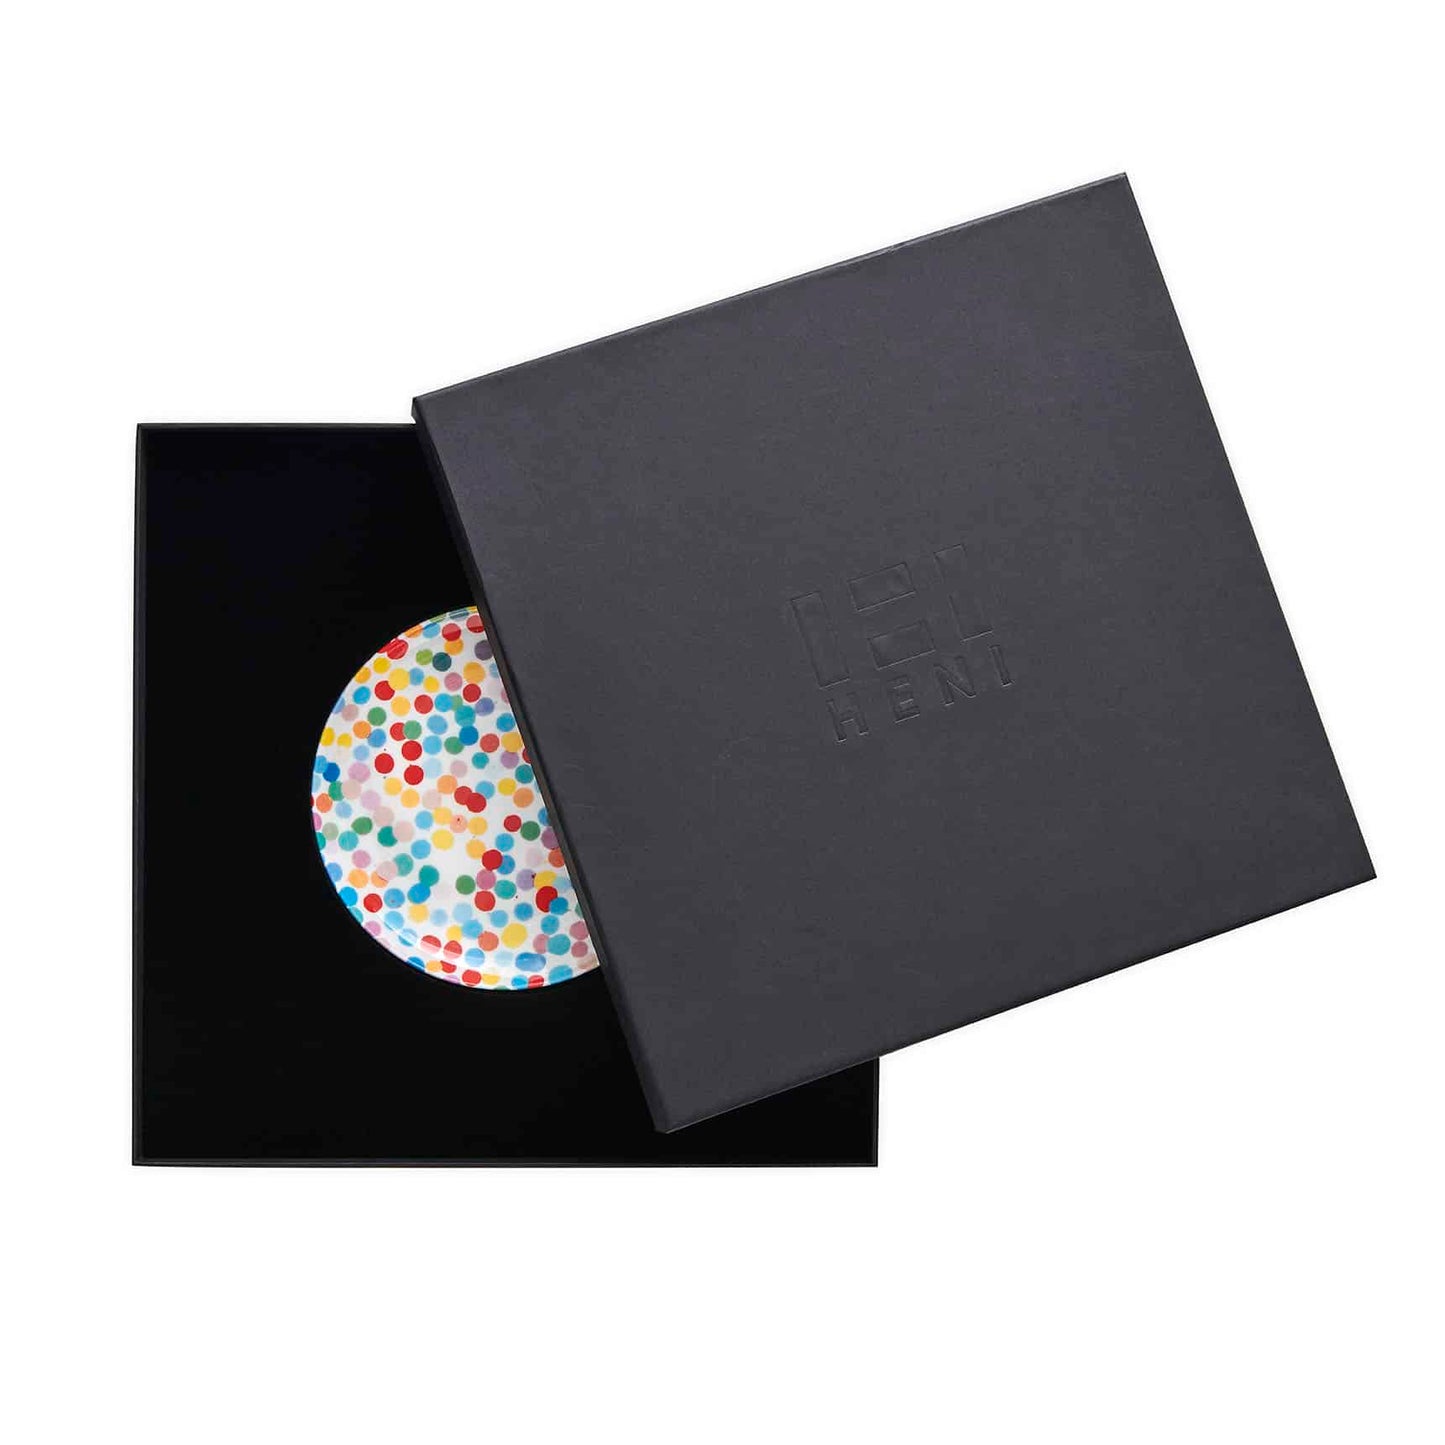 Damien Hirst - All Over Dot Plate (Small) Screen-printed Currency Dot design